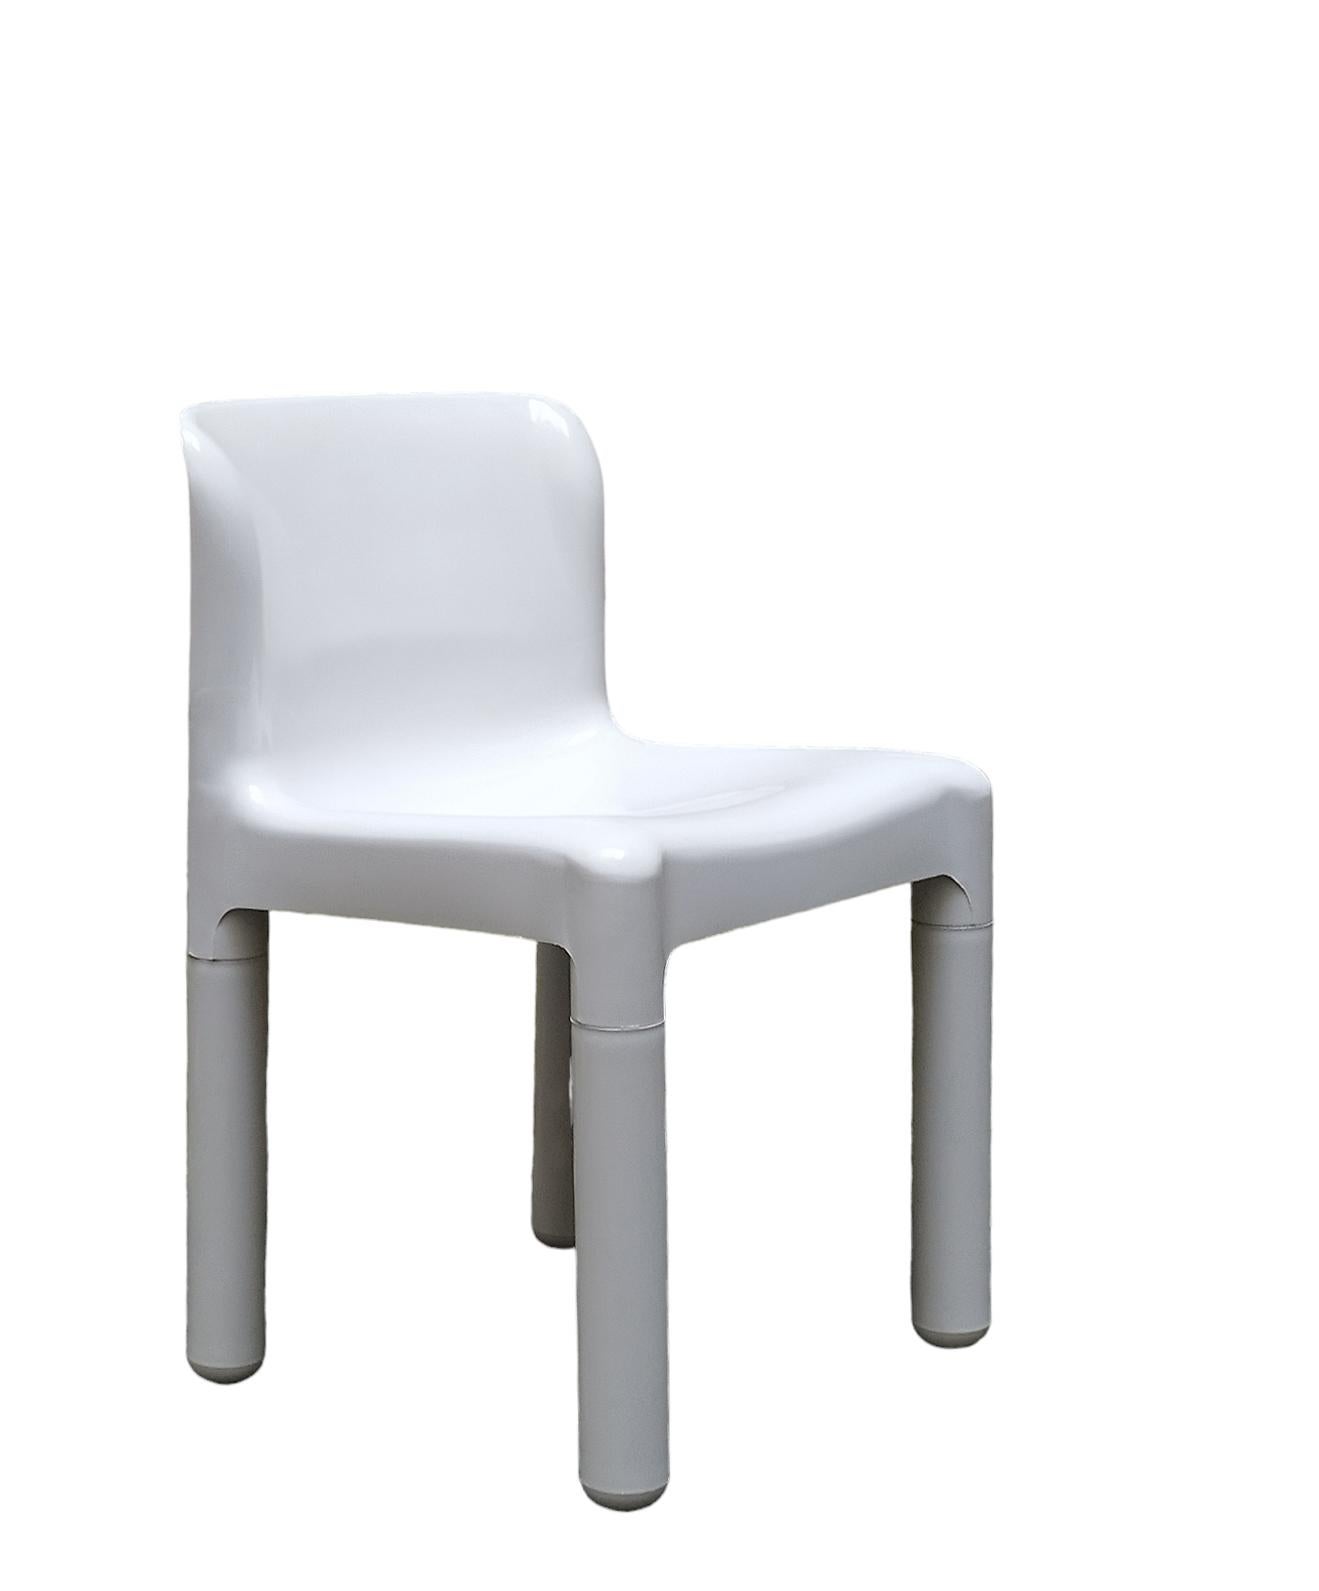 Modern Italian white plastic chair with rounded seat and back, Mod.